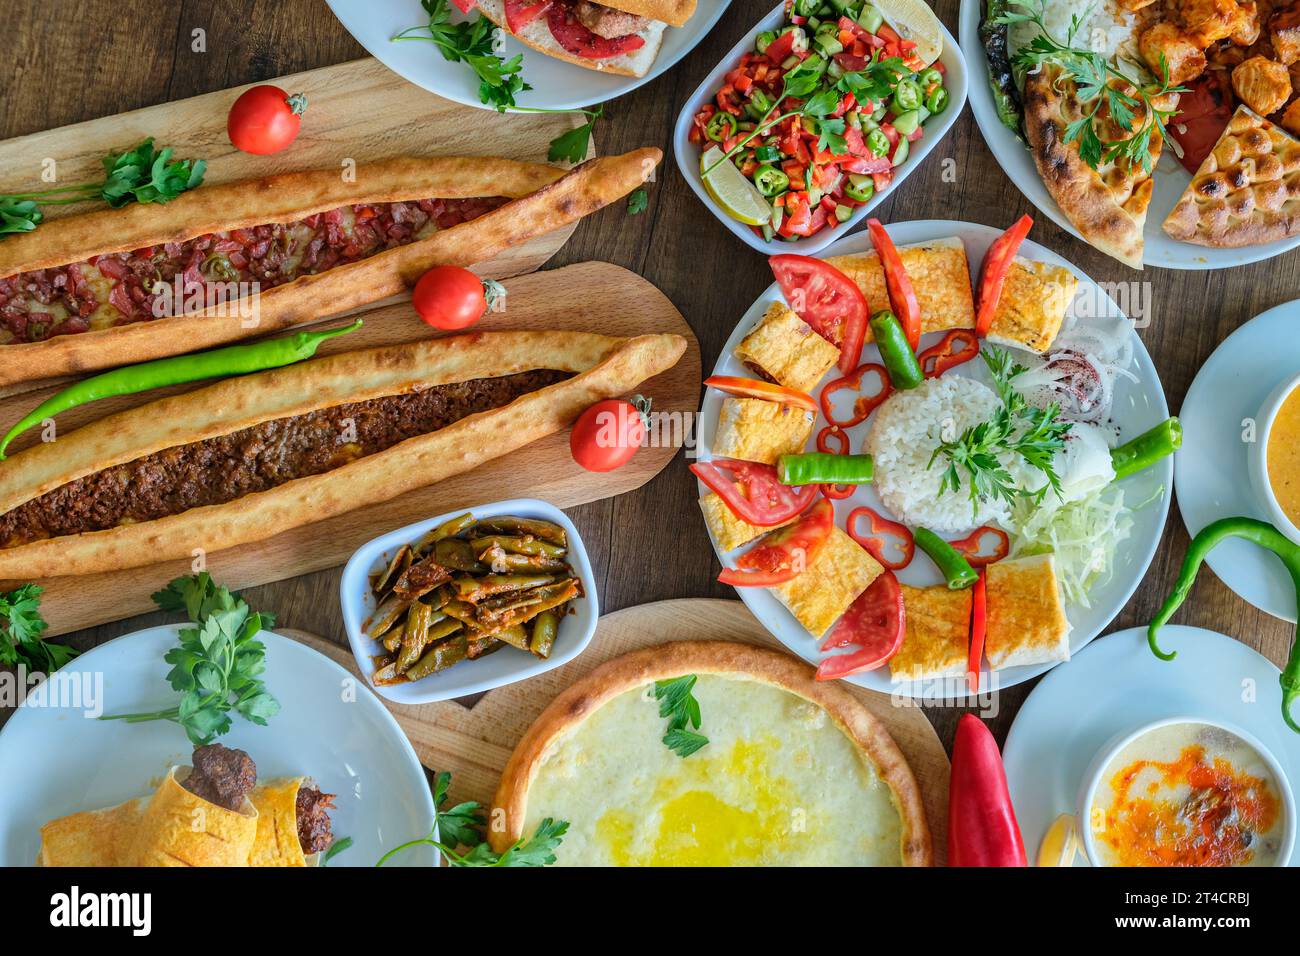 Various meat dishes and Turkish pastries Stock Photo